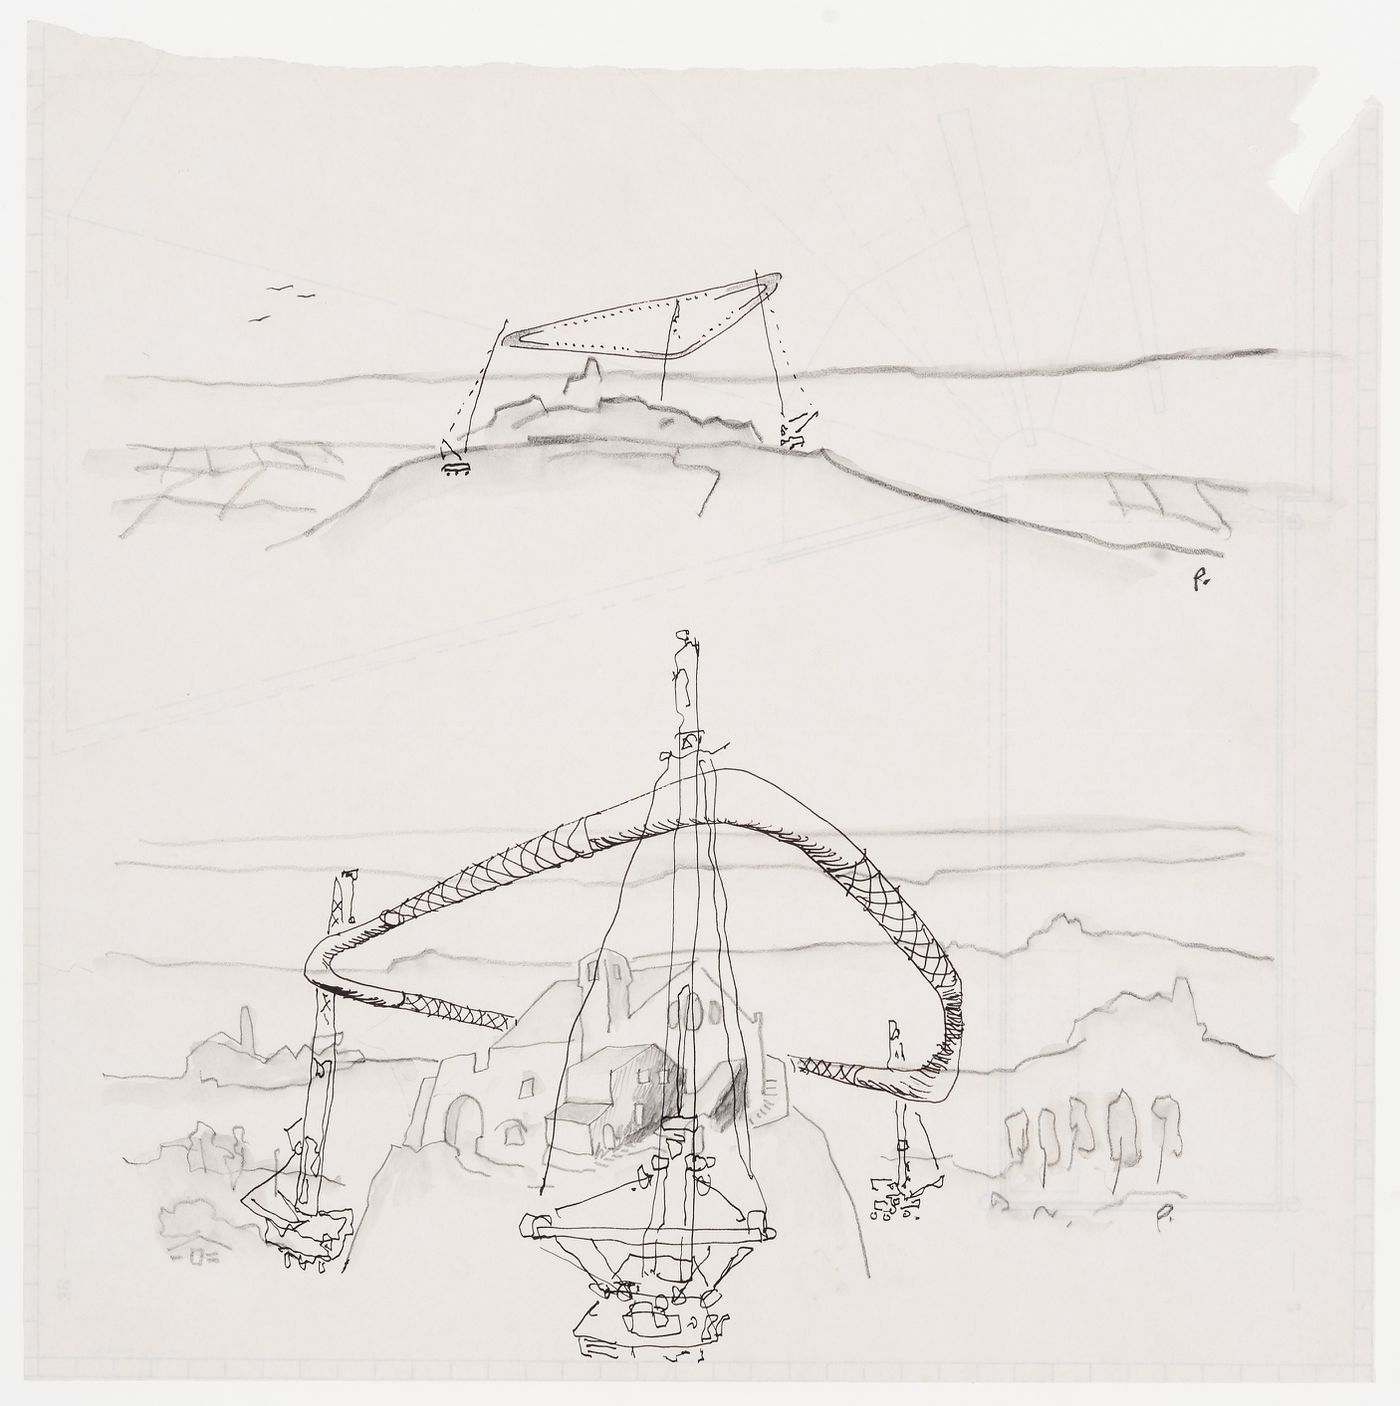 Turtlan: conceptual sketches for "Halo" and supporting structures around a hill town site